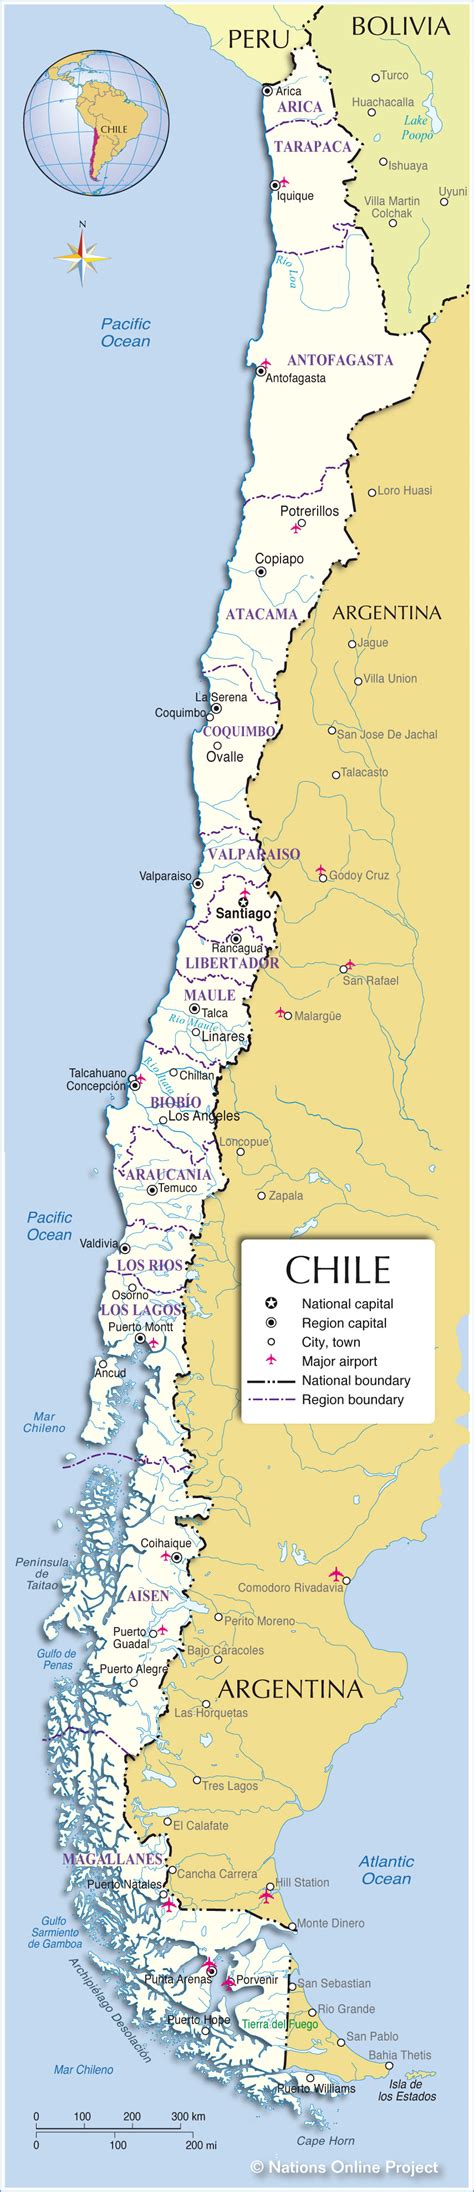 Administrative Map Of Chile Nations Online Project